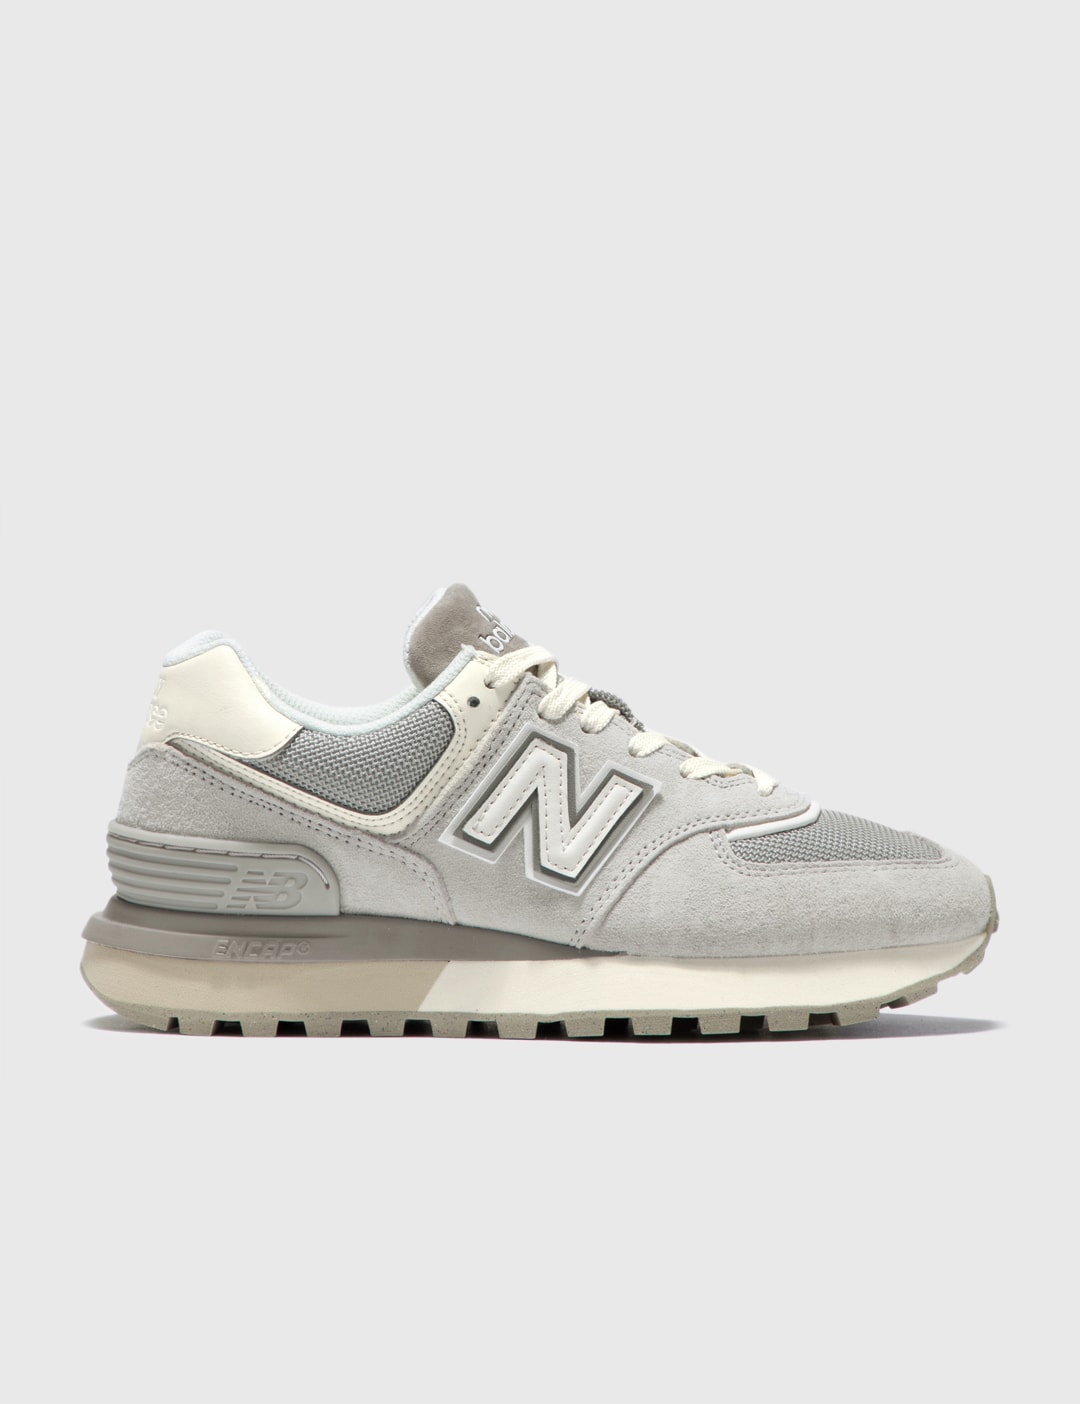 Manga Grap Oppervlakte New Balance - 574 Legacy | HBX - Globally Curated Fashion and Lifestyle by  Hypebeast